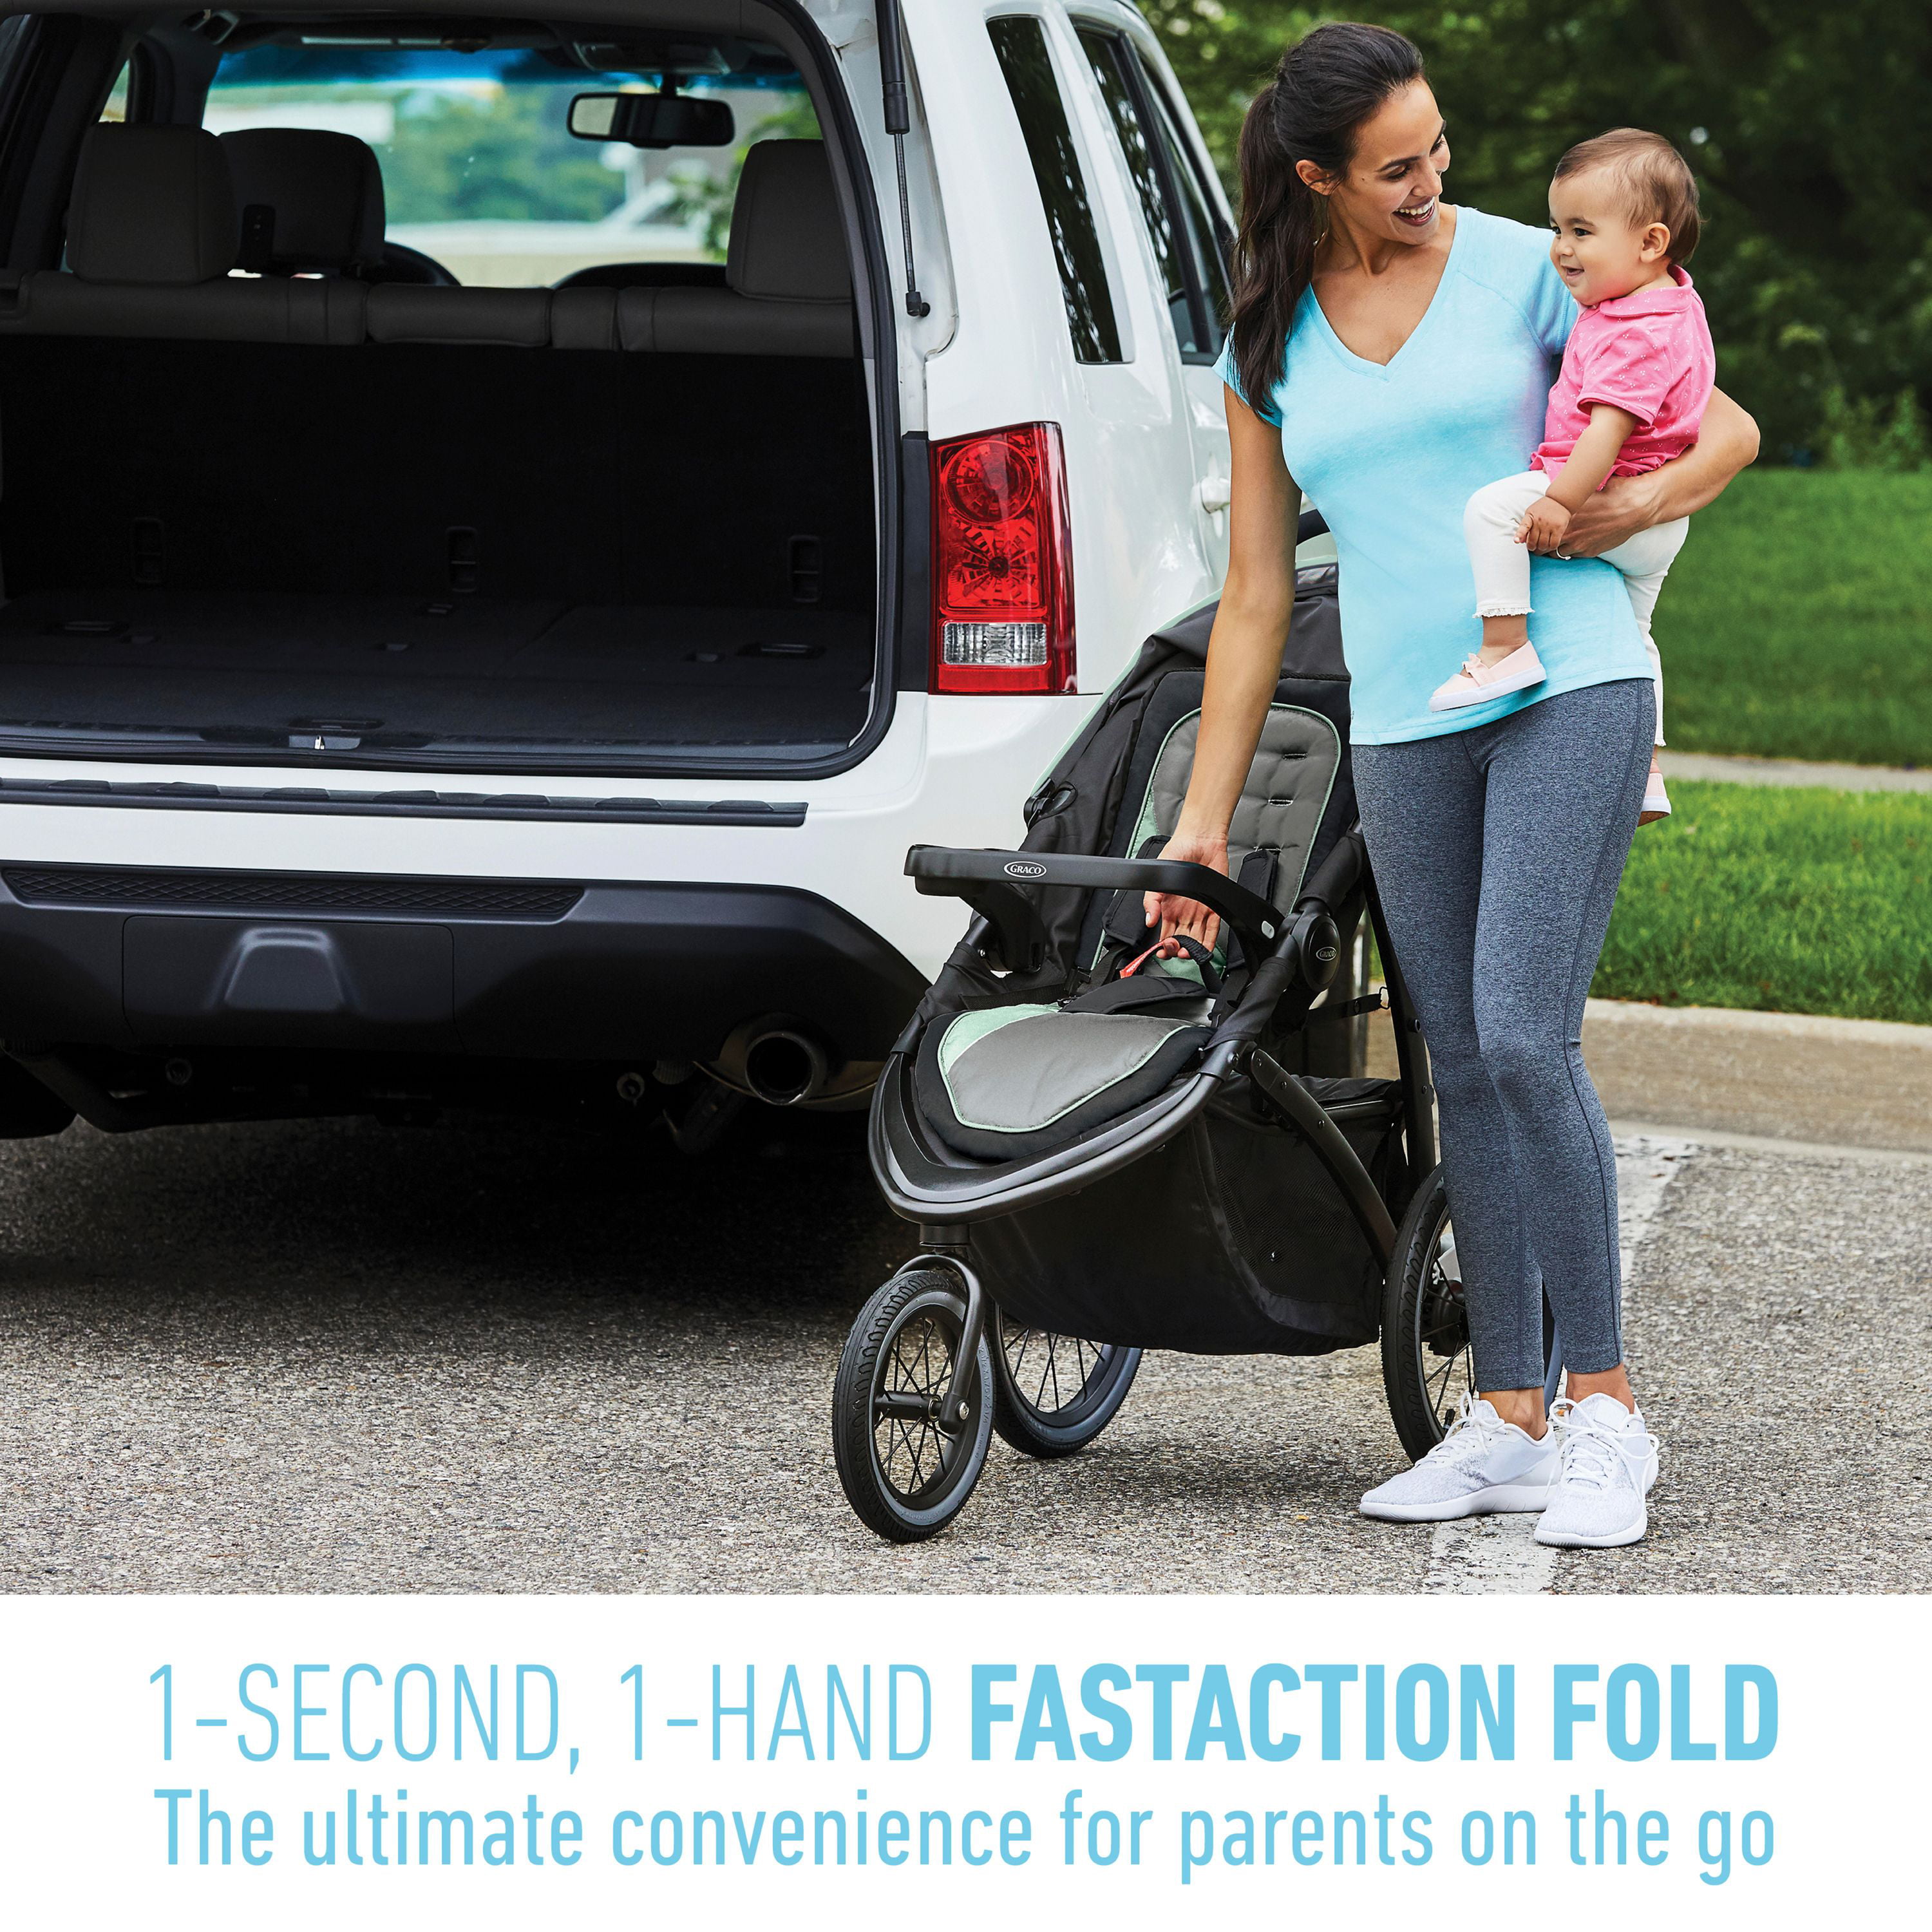 graco fastaction jogger lx drive